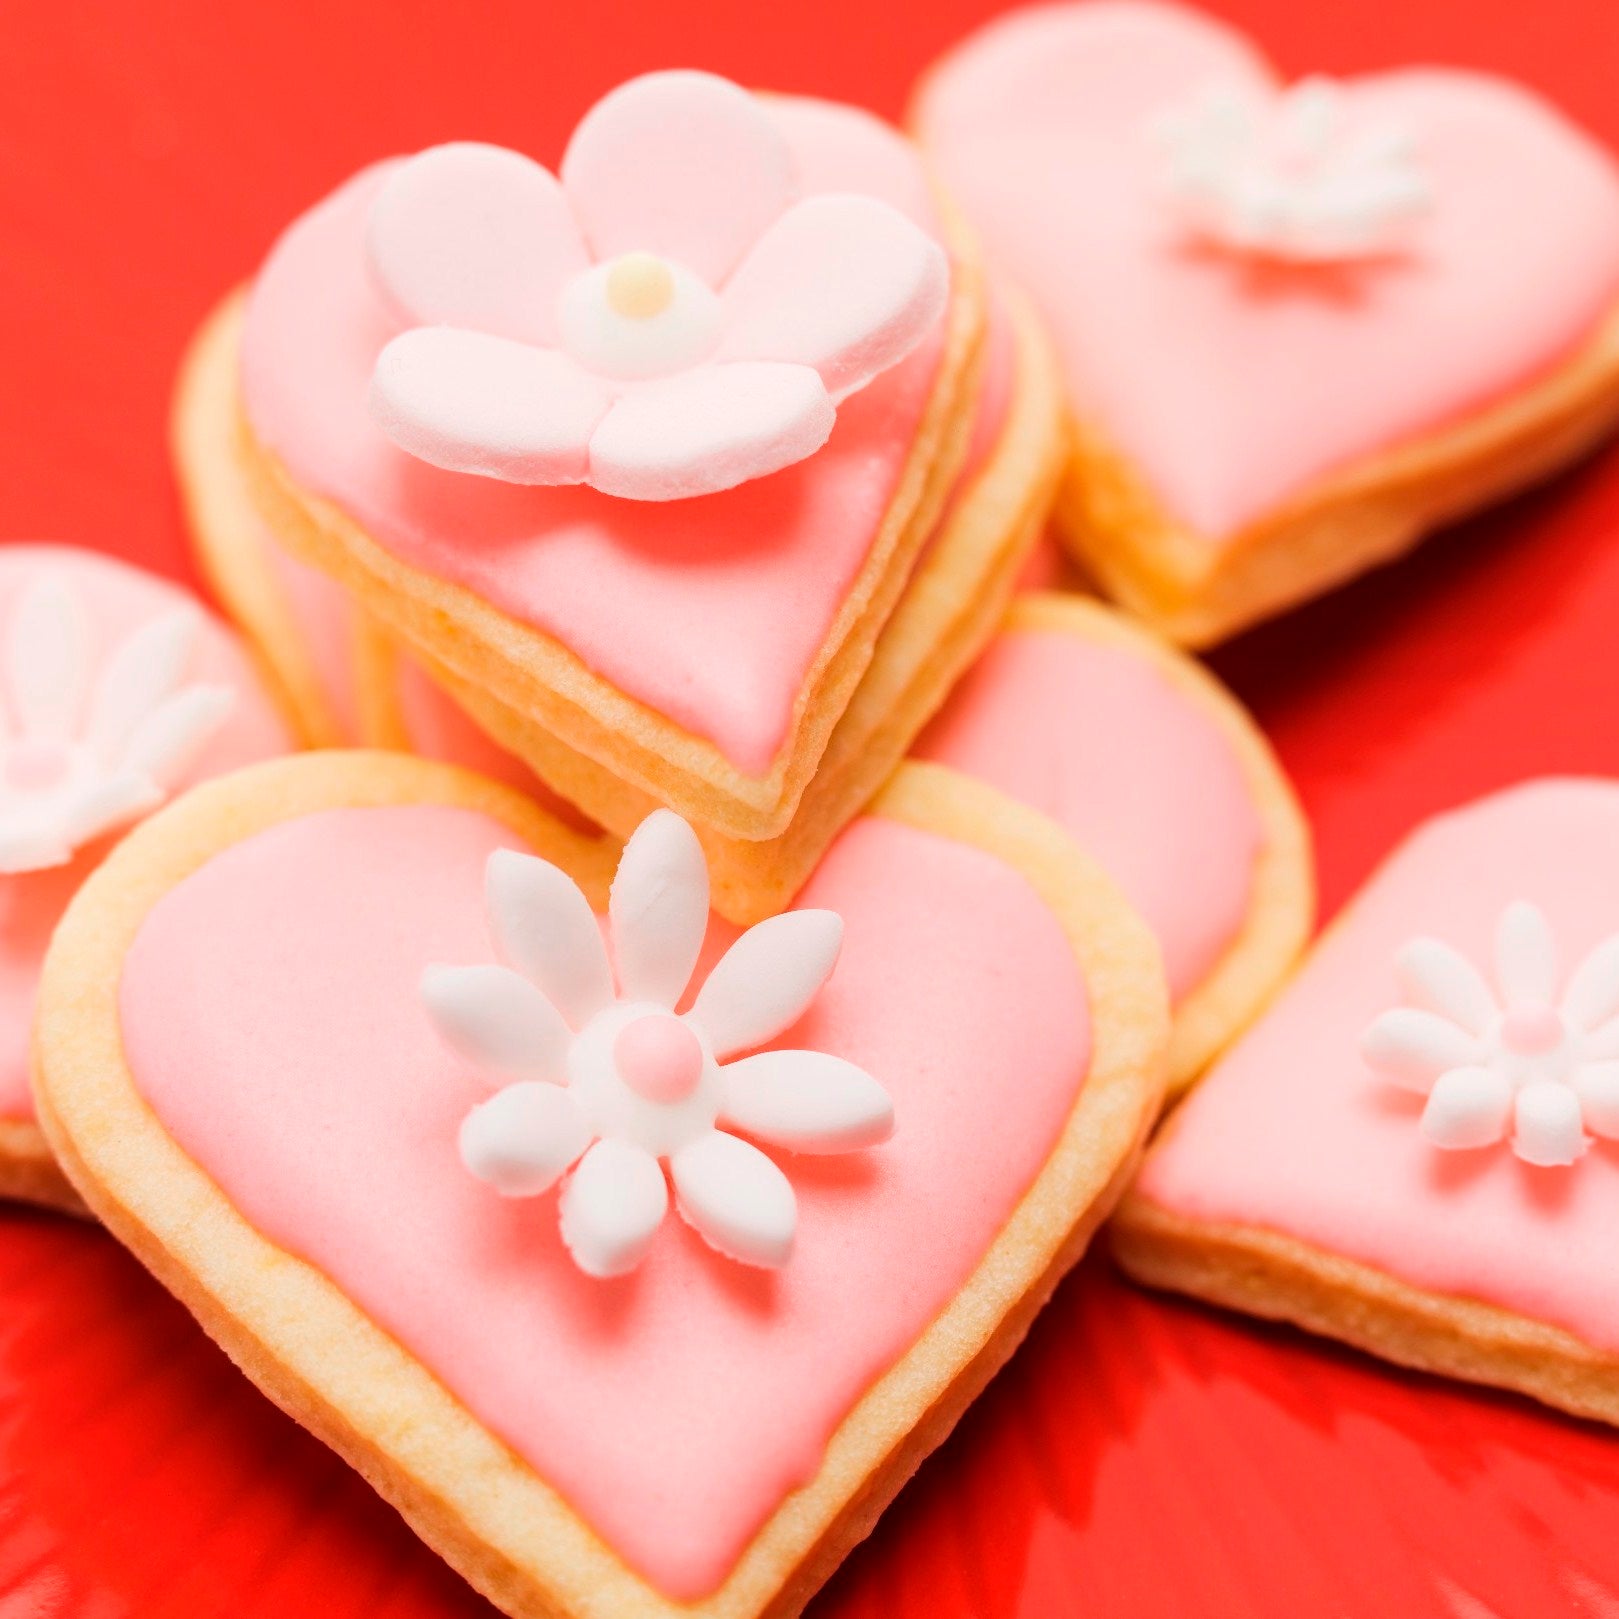 1-Almond-heart-shaped-biscuits.jpg